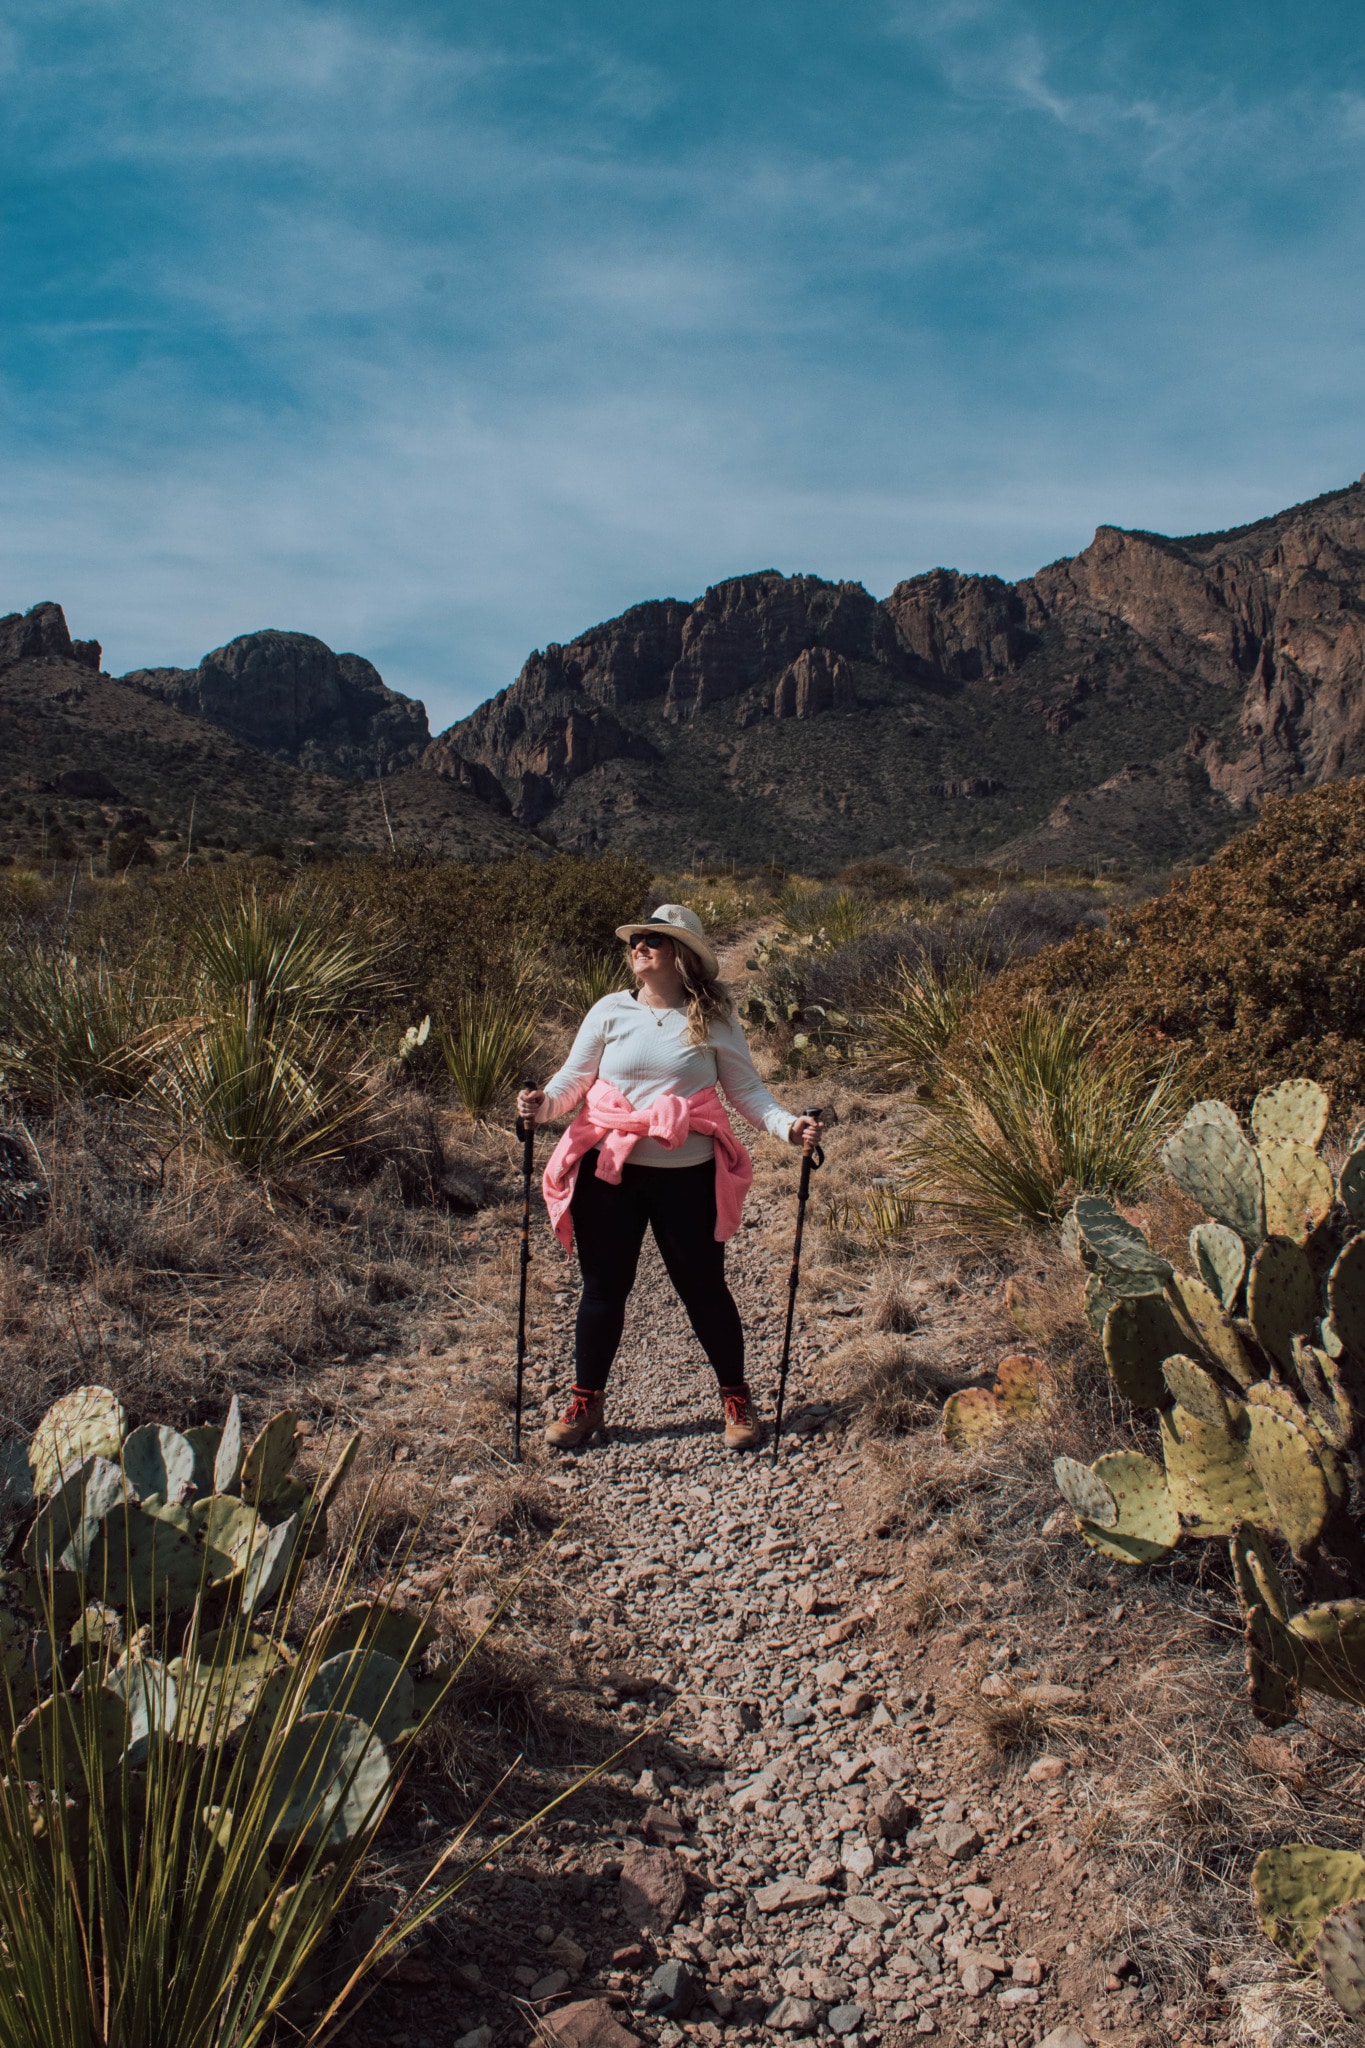 What to Wear Hiking: The Complete Guide for Women - Helene in Between